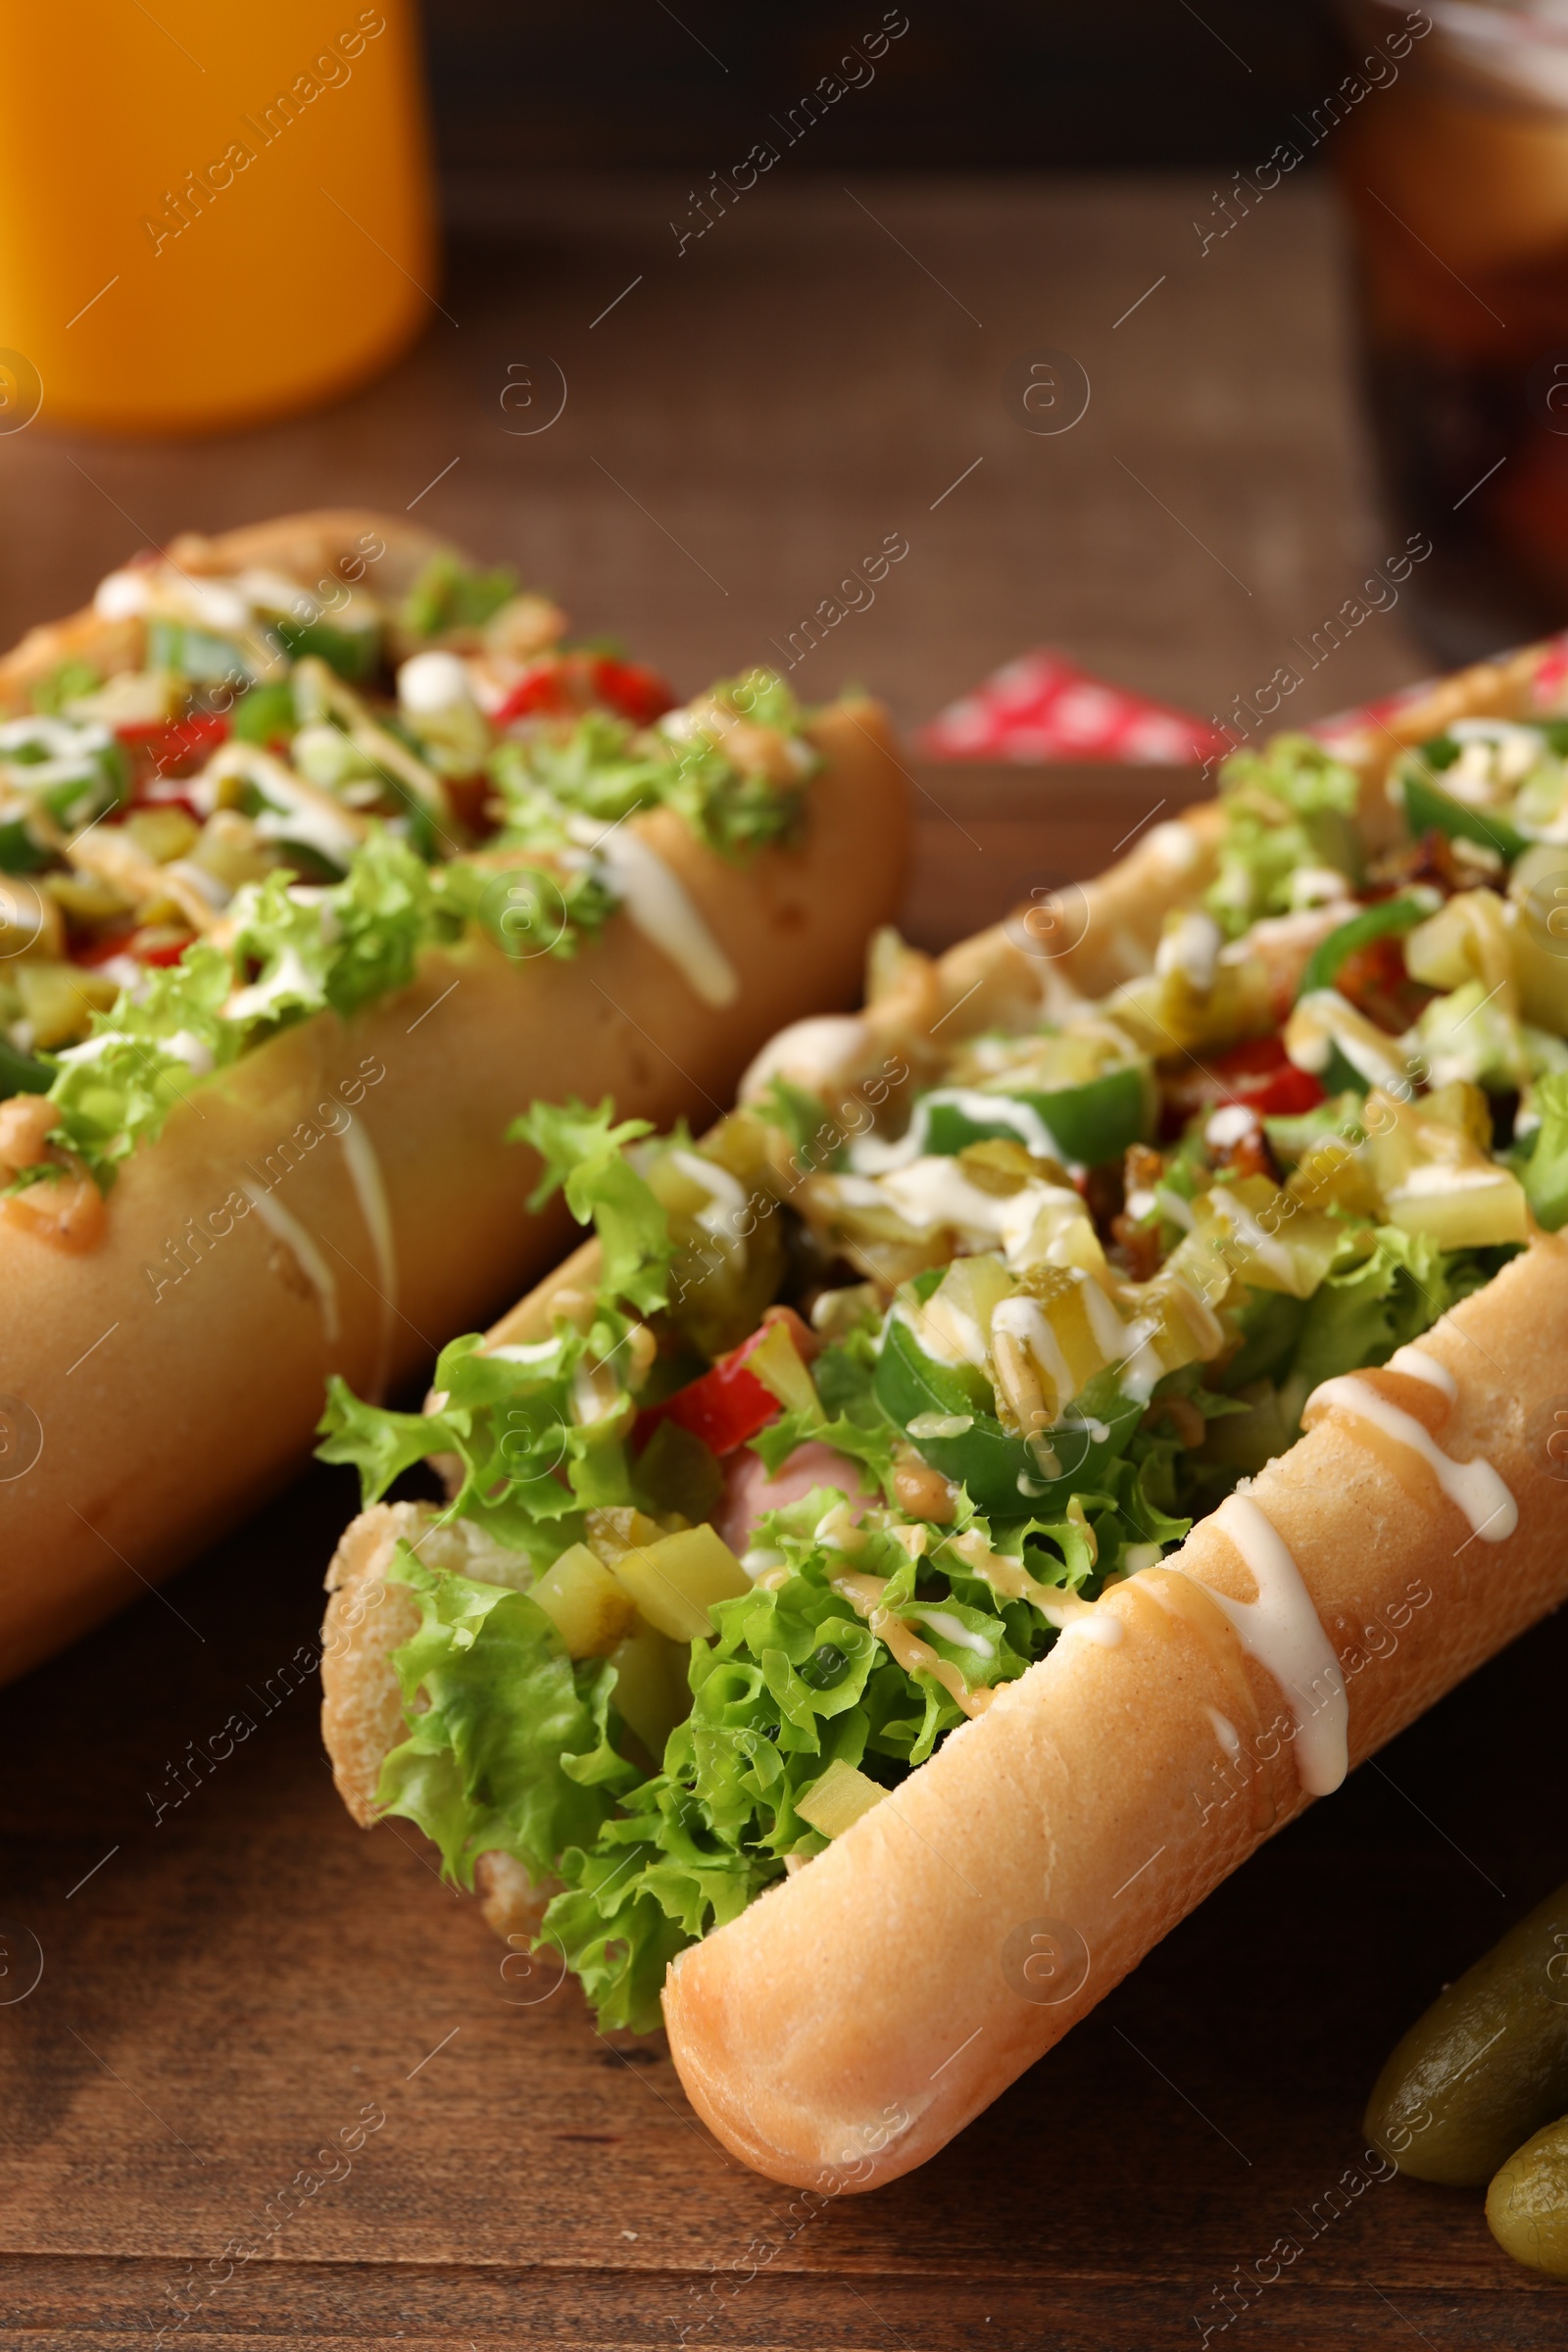 Photo of Tasty hot dogs with chili, lettuce, pickles and sauces on wooden table, closeup